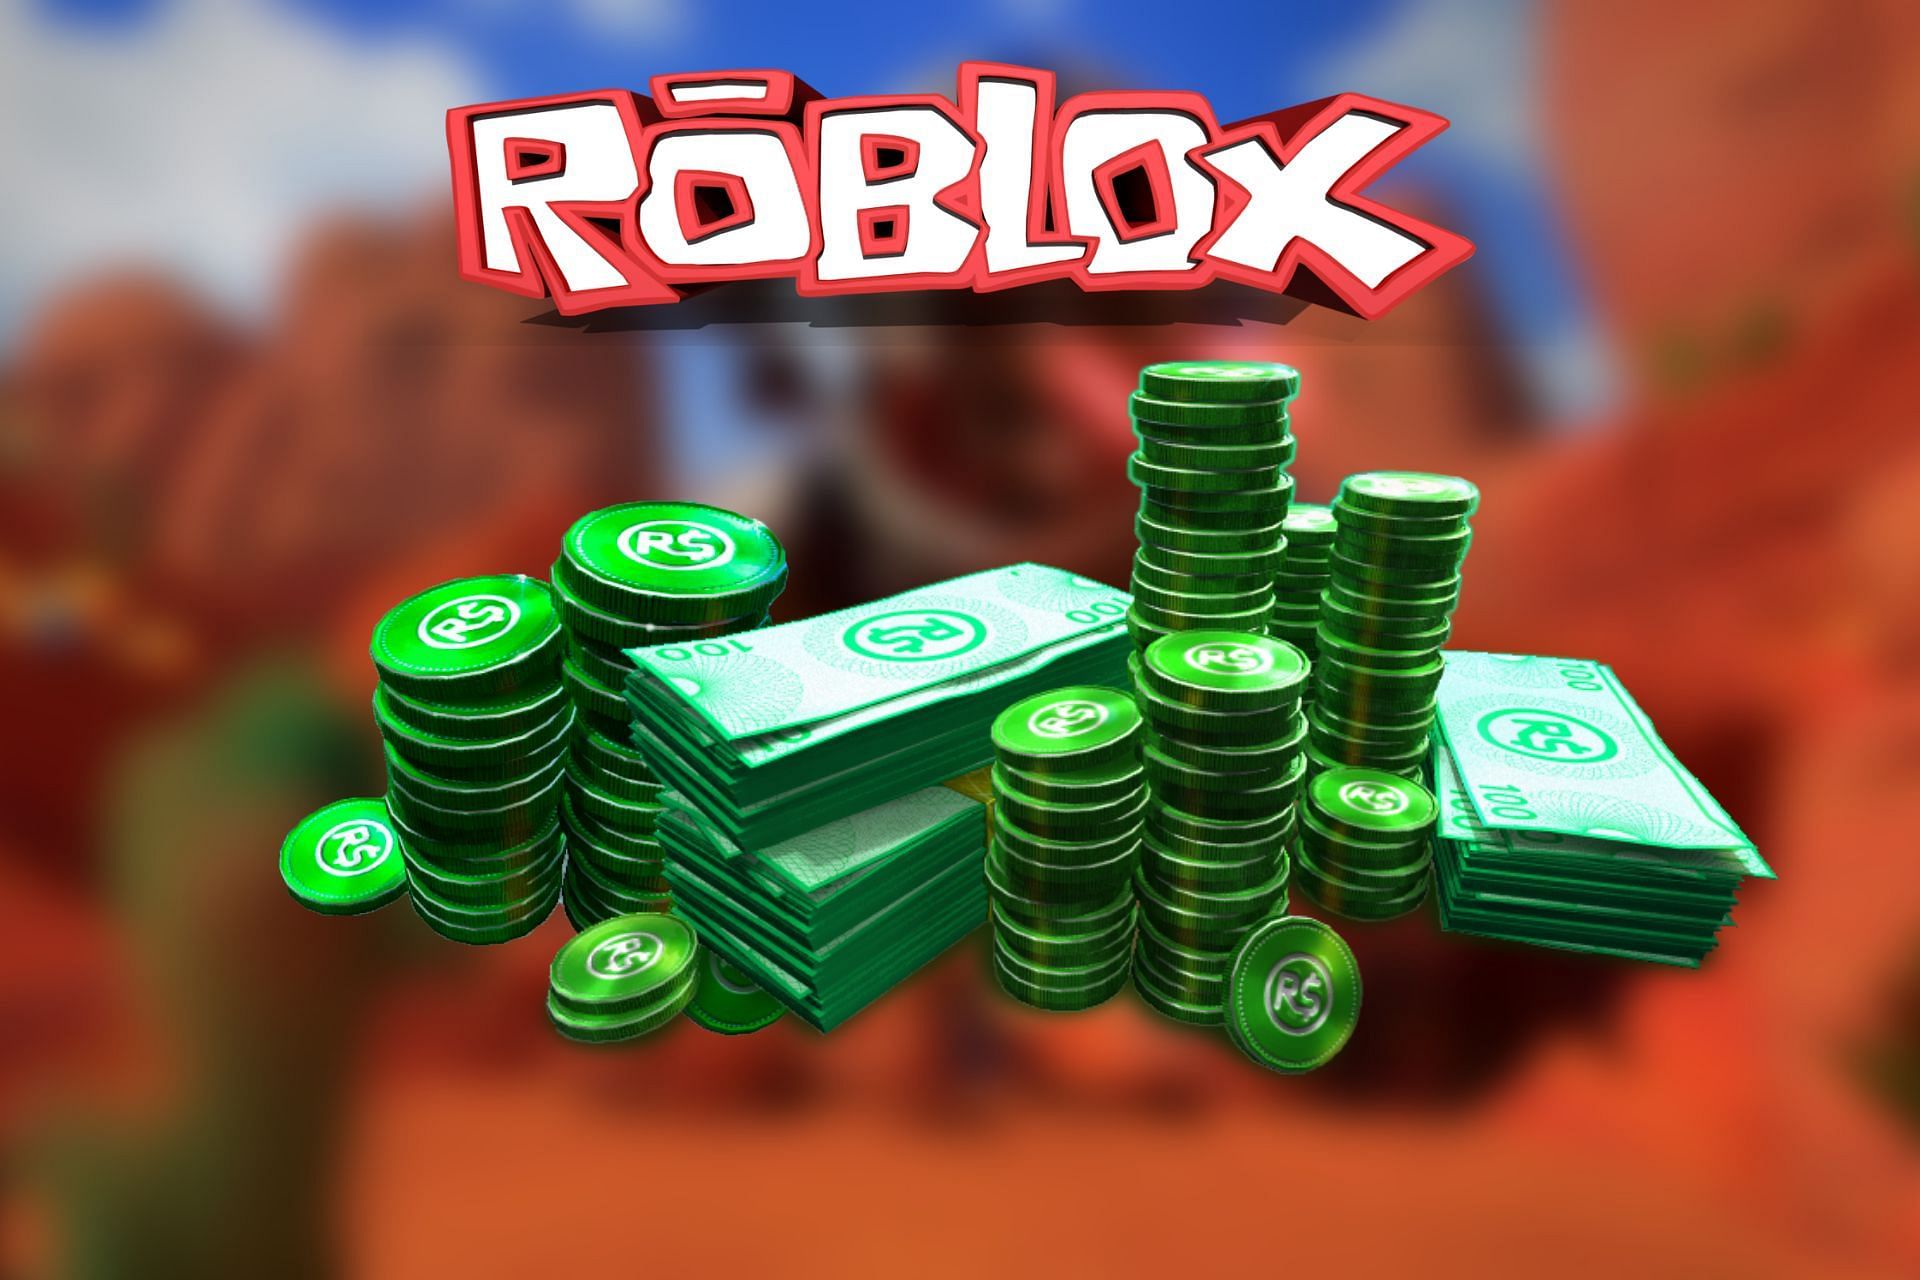 Robux is an in-game currency on the platform (Image via Sportskeeda)